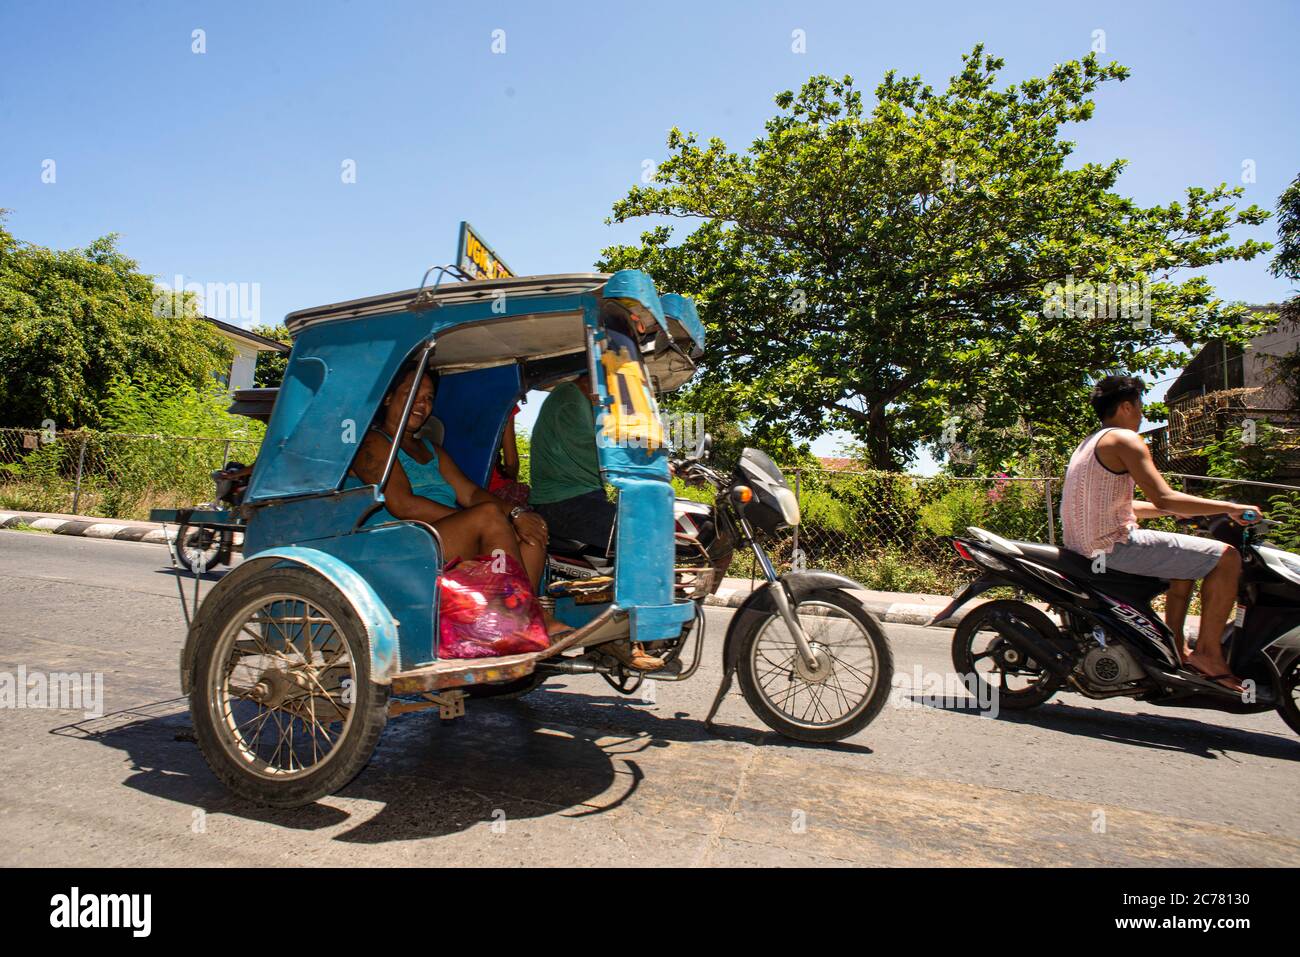 A motorbike taxi in use, Vigan, Philippines Stock Photo